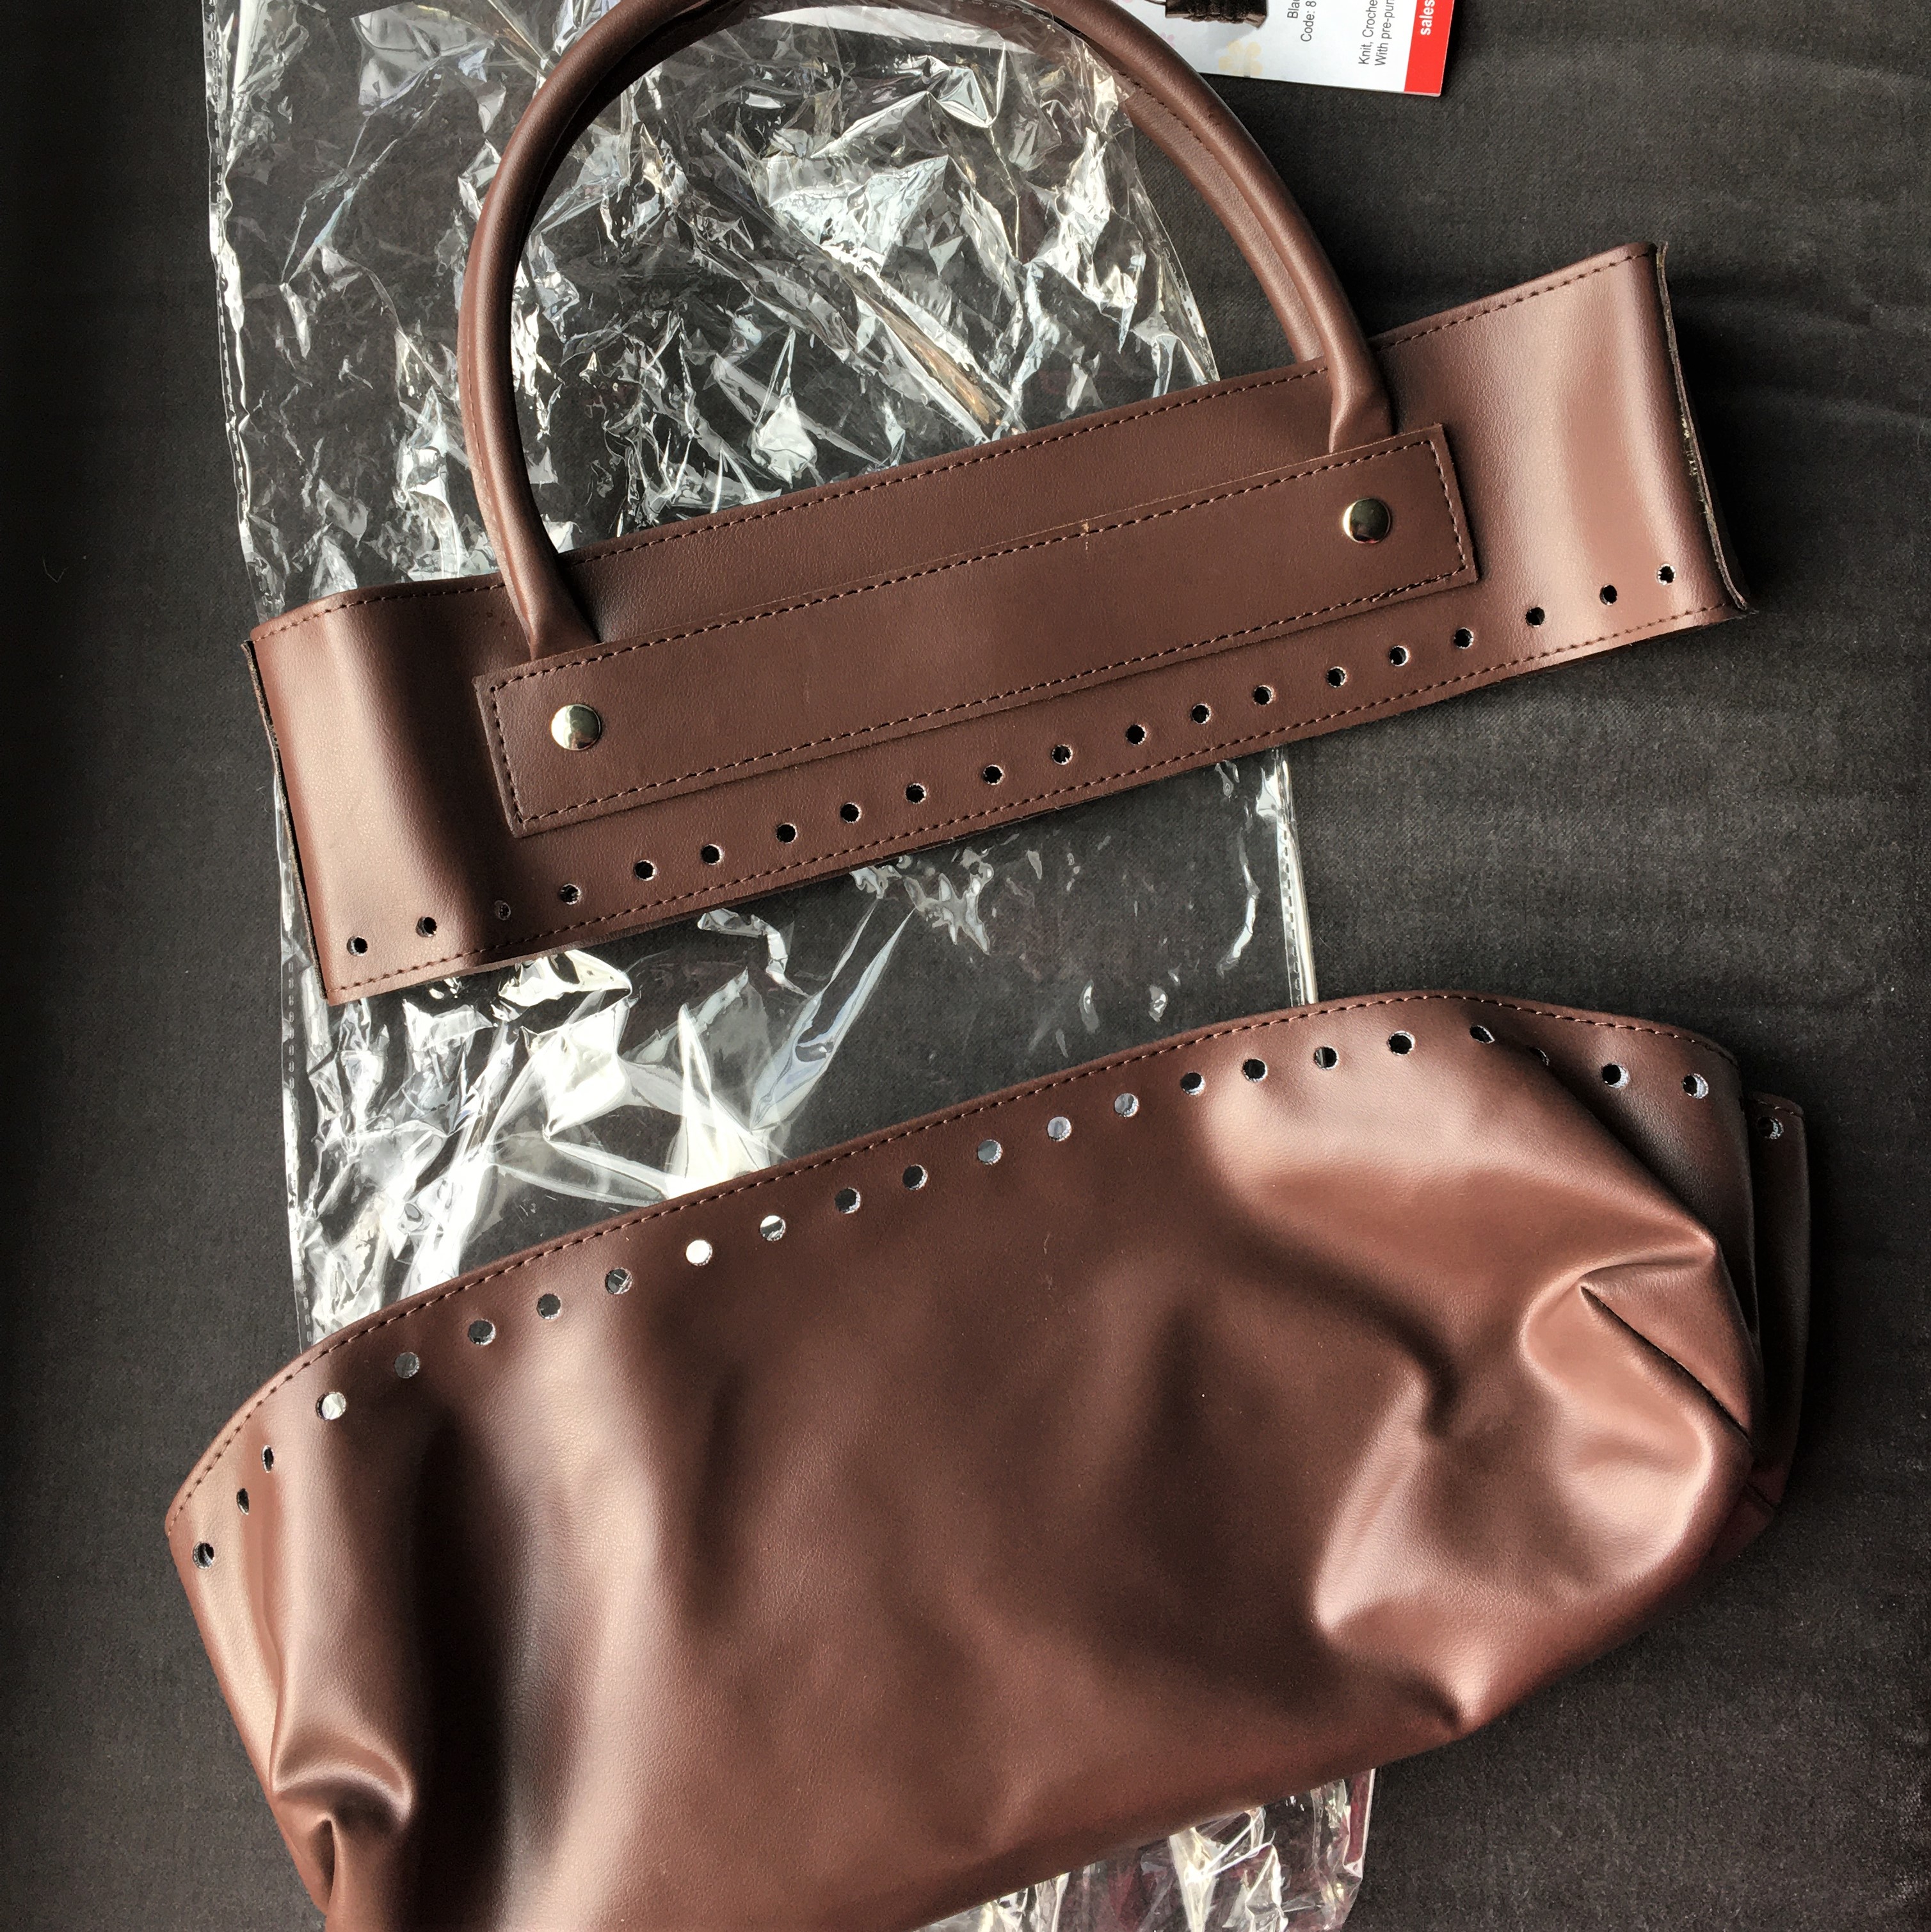 Brown pleather bag top and bottom against plastic shipping bag and a grey background.